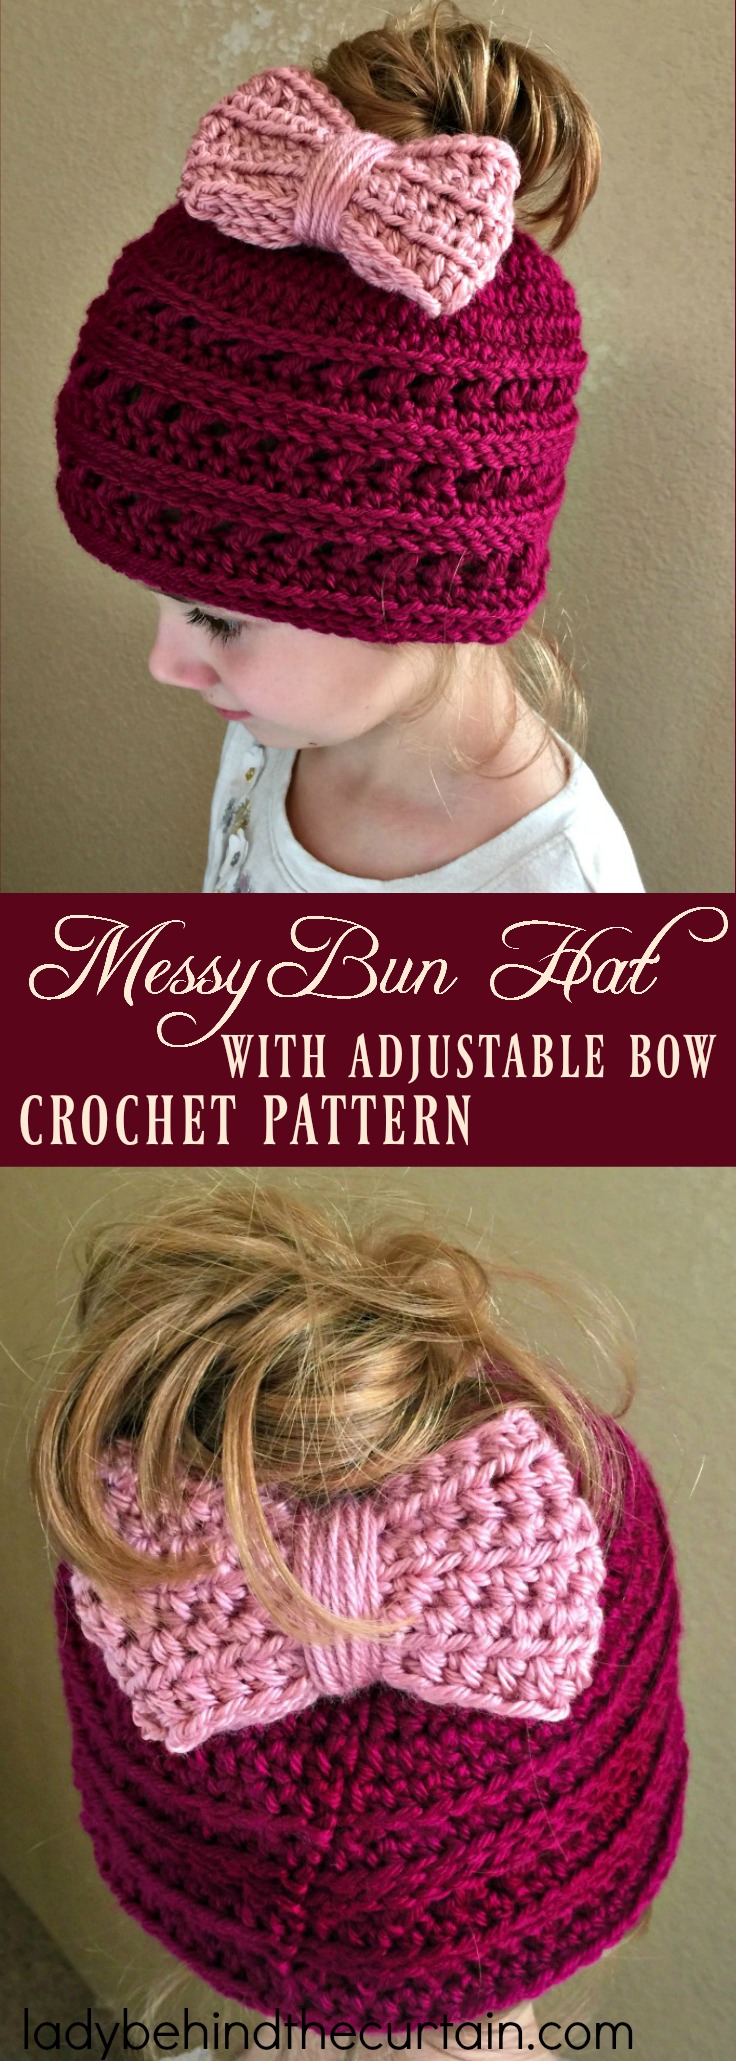 Messy Bun Hat with Adjustable Bow Crochet Pattern | easy crochet pattern, winter hat, messy bun fun